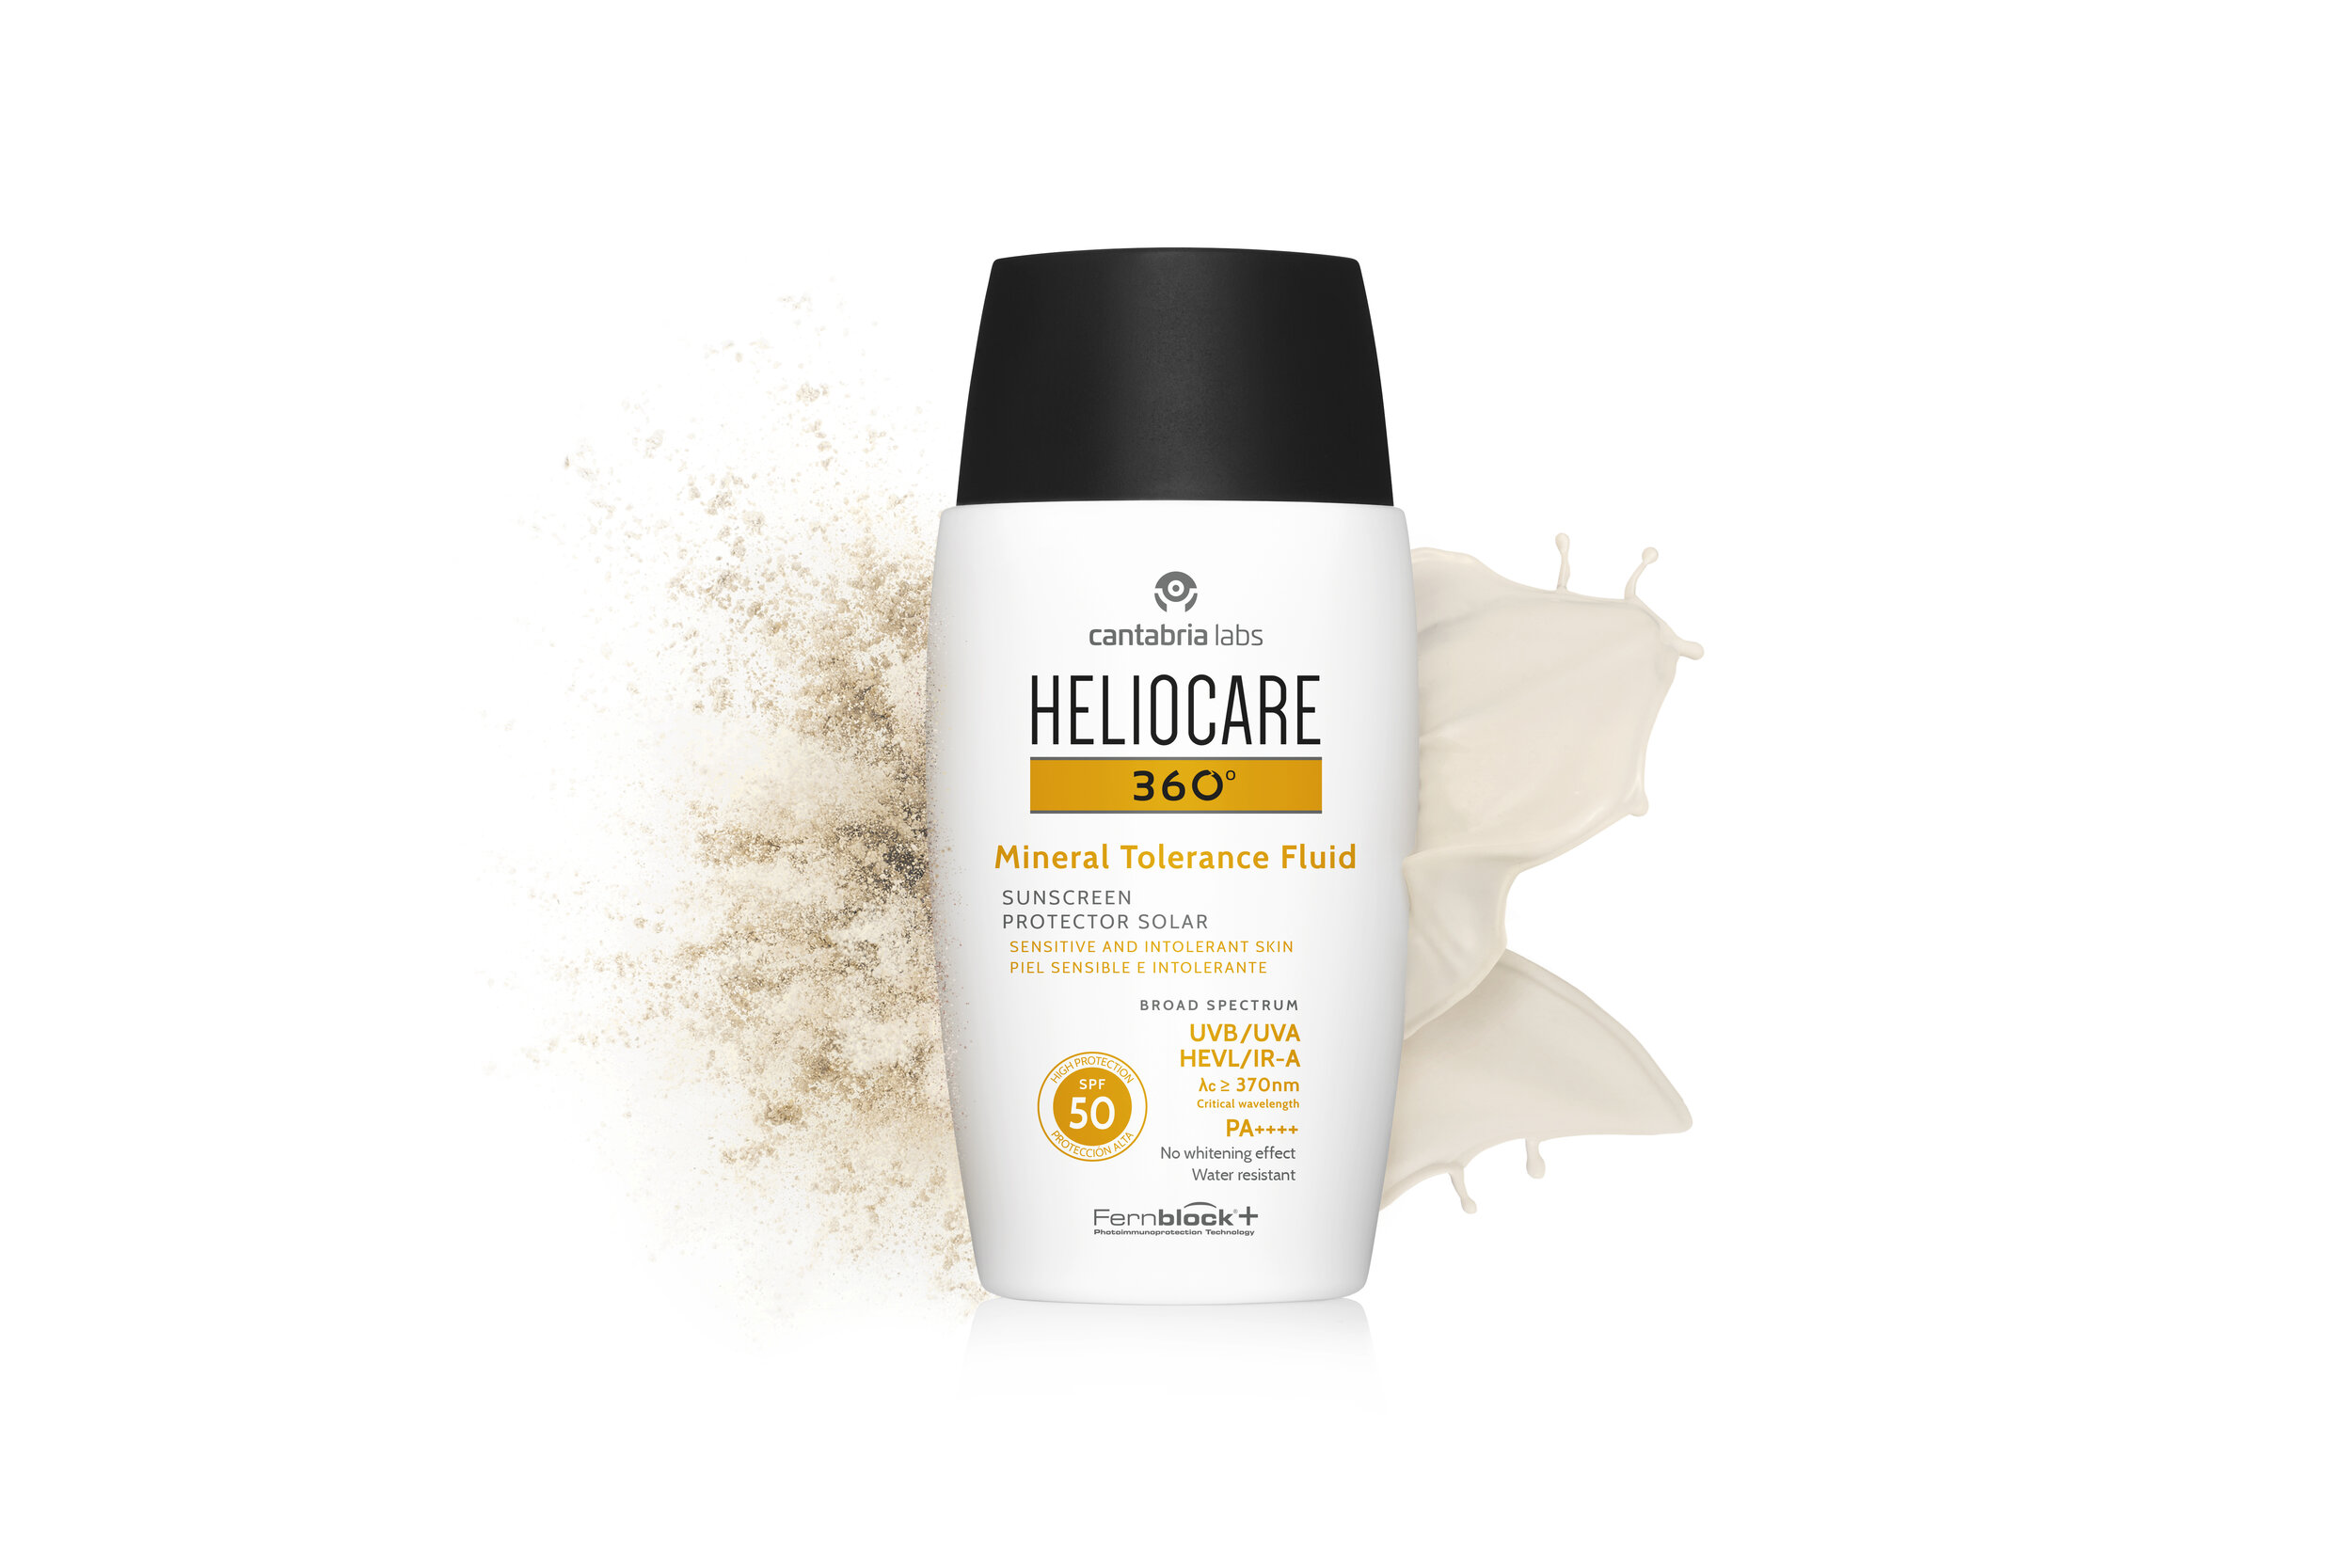 Heliocare fluid spf 50. Heliocare Mineral tolerance Fluid. Heliocare SPF флюид. Heliocare минеральный флюид SPF 50. Cartabrialabs Heliocare 360 Mineral.